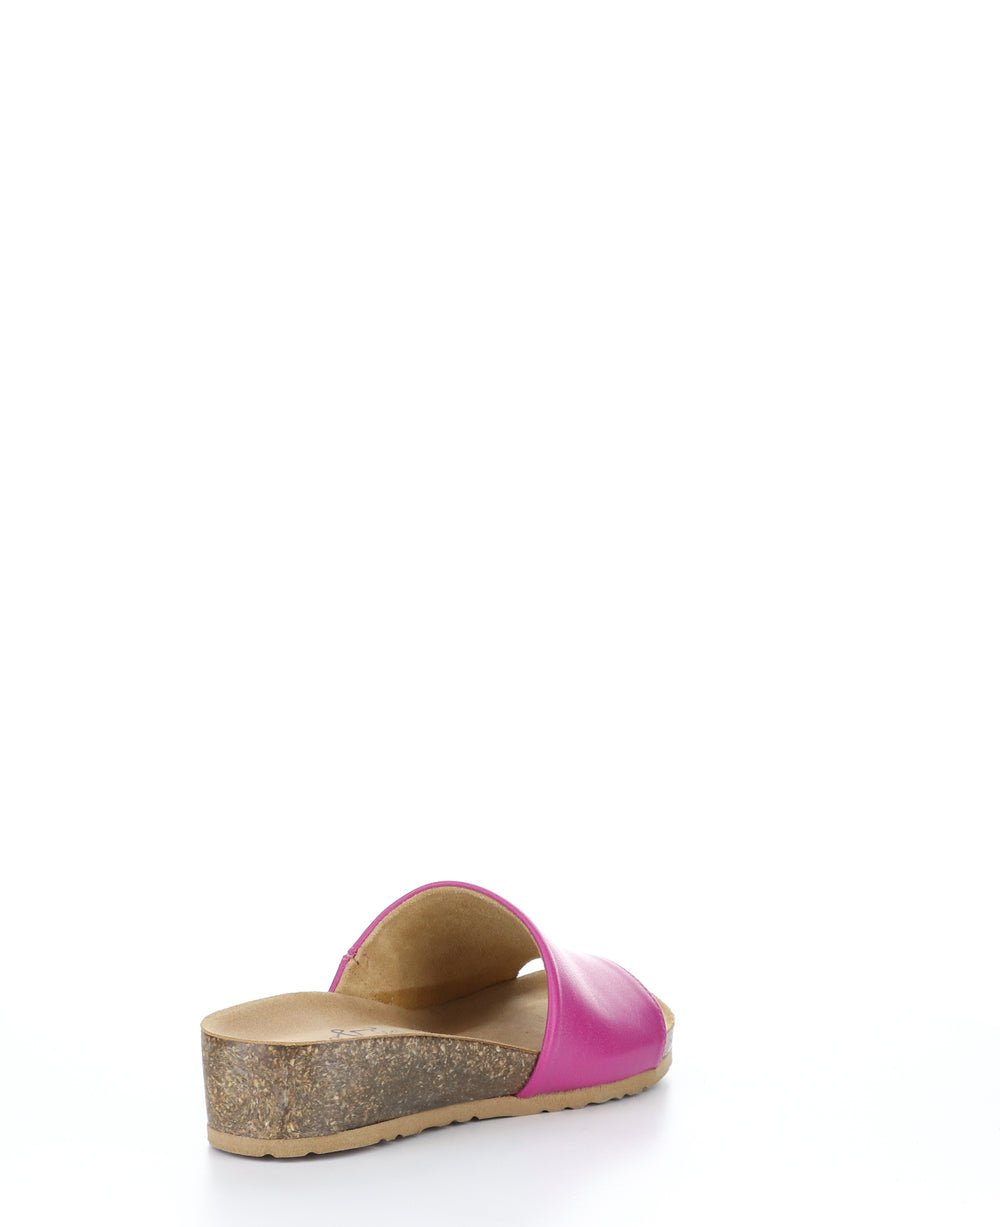 LUX ORCHID Wedge Mules|LUX Mules à Bout Ouvert in Rose